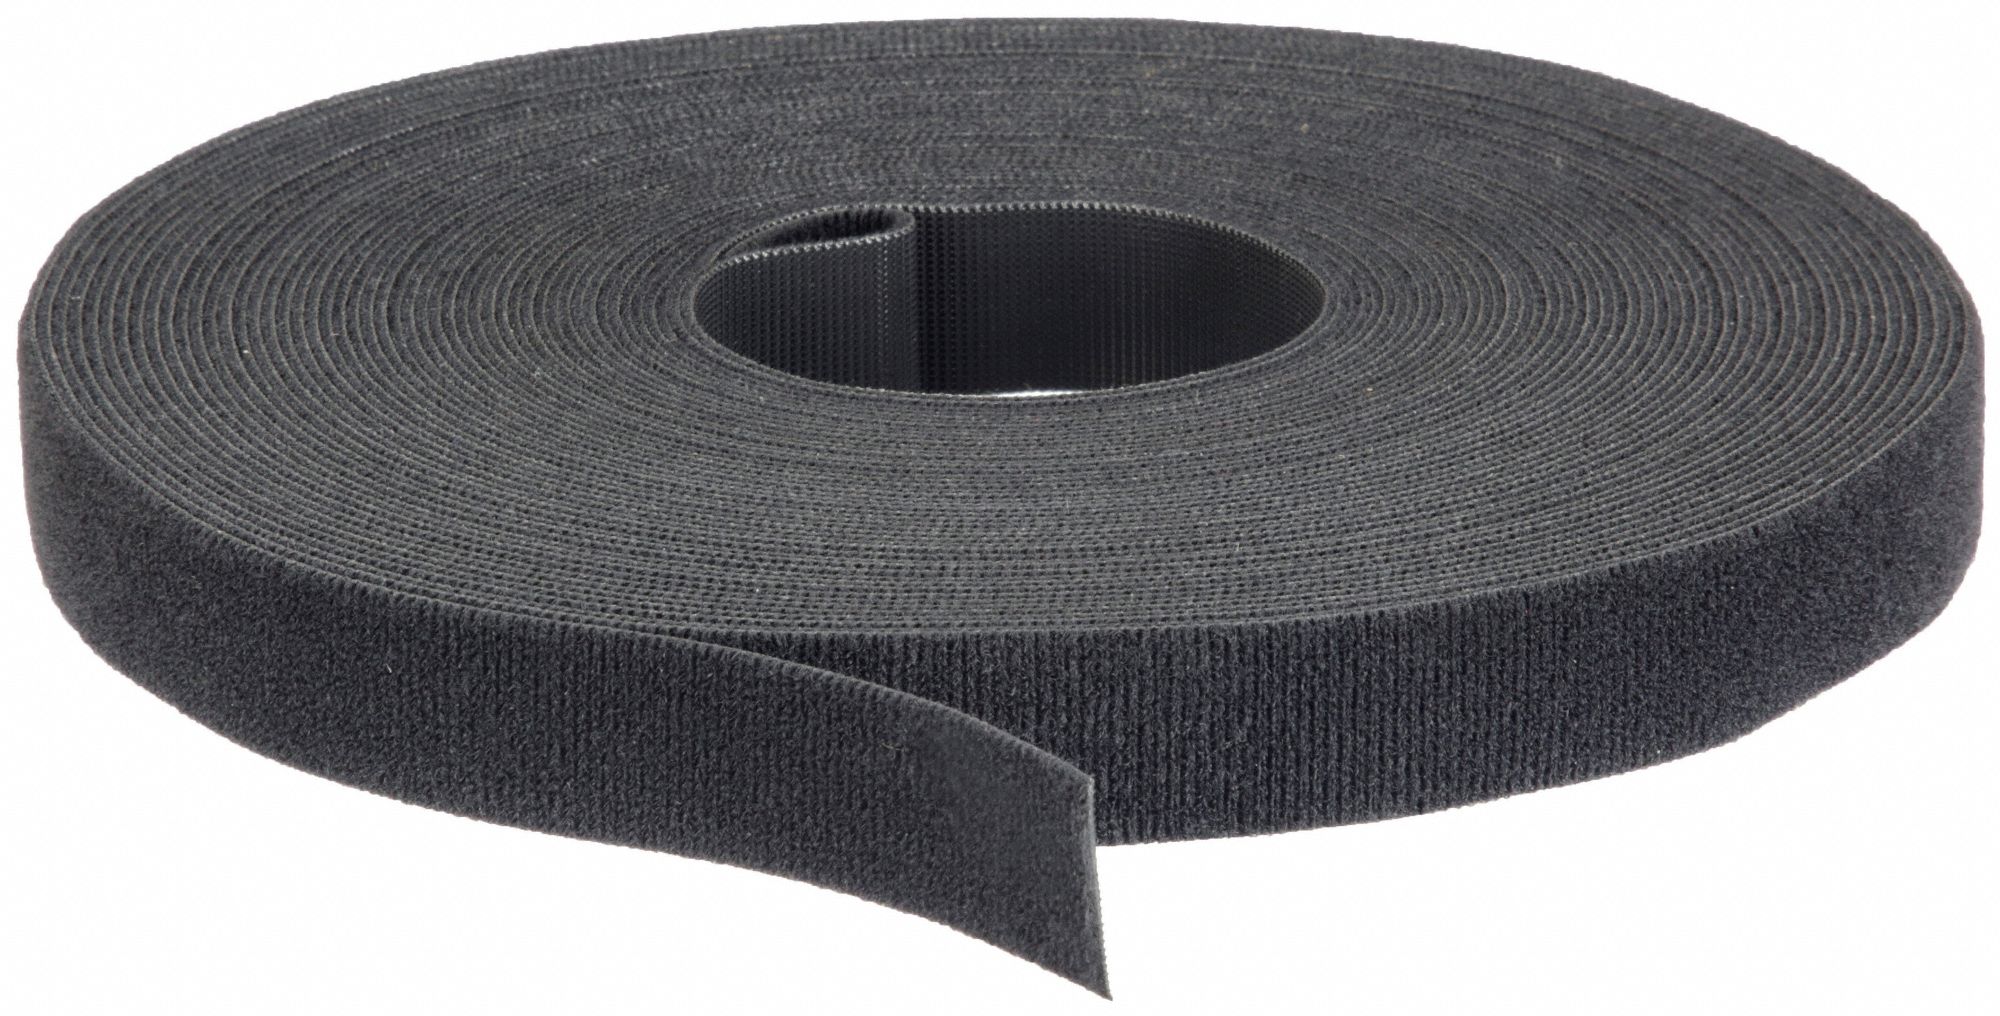 VELCRO BRAND, 75 ft Lg, 0.5 in Wd, Hook-and-Loop Cable Tie Roll -  5JLE2